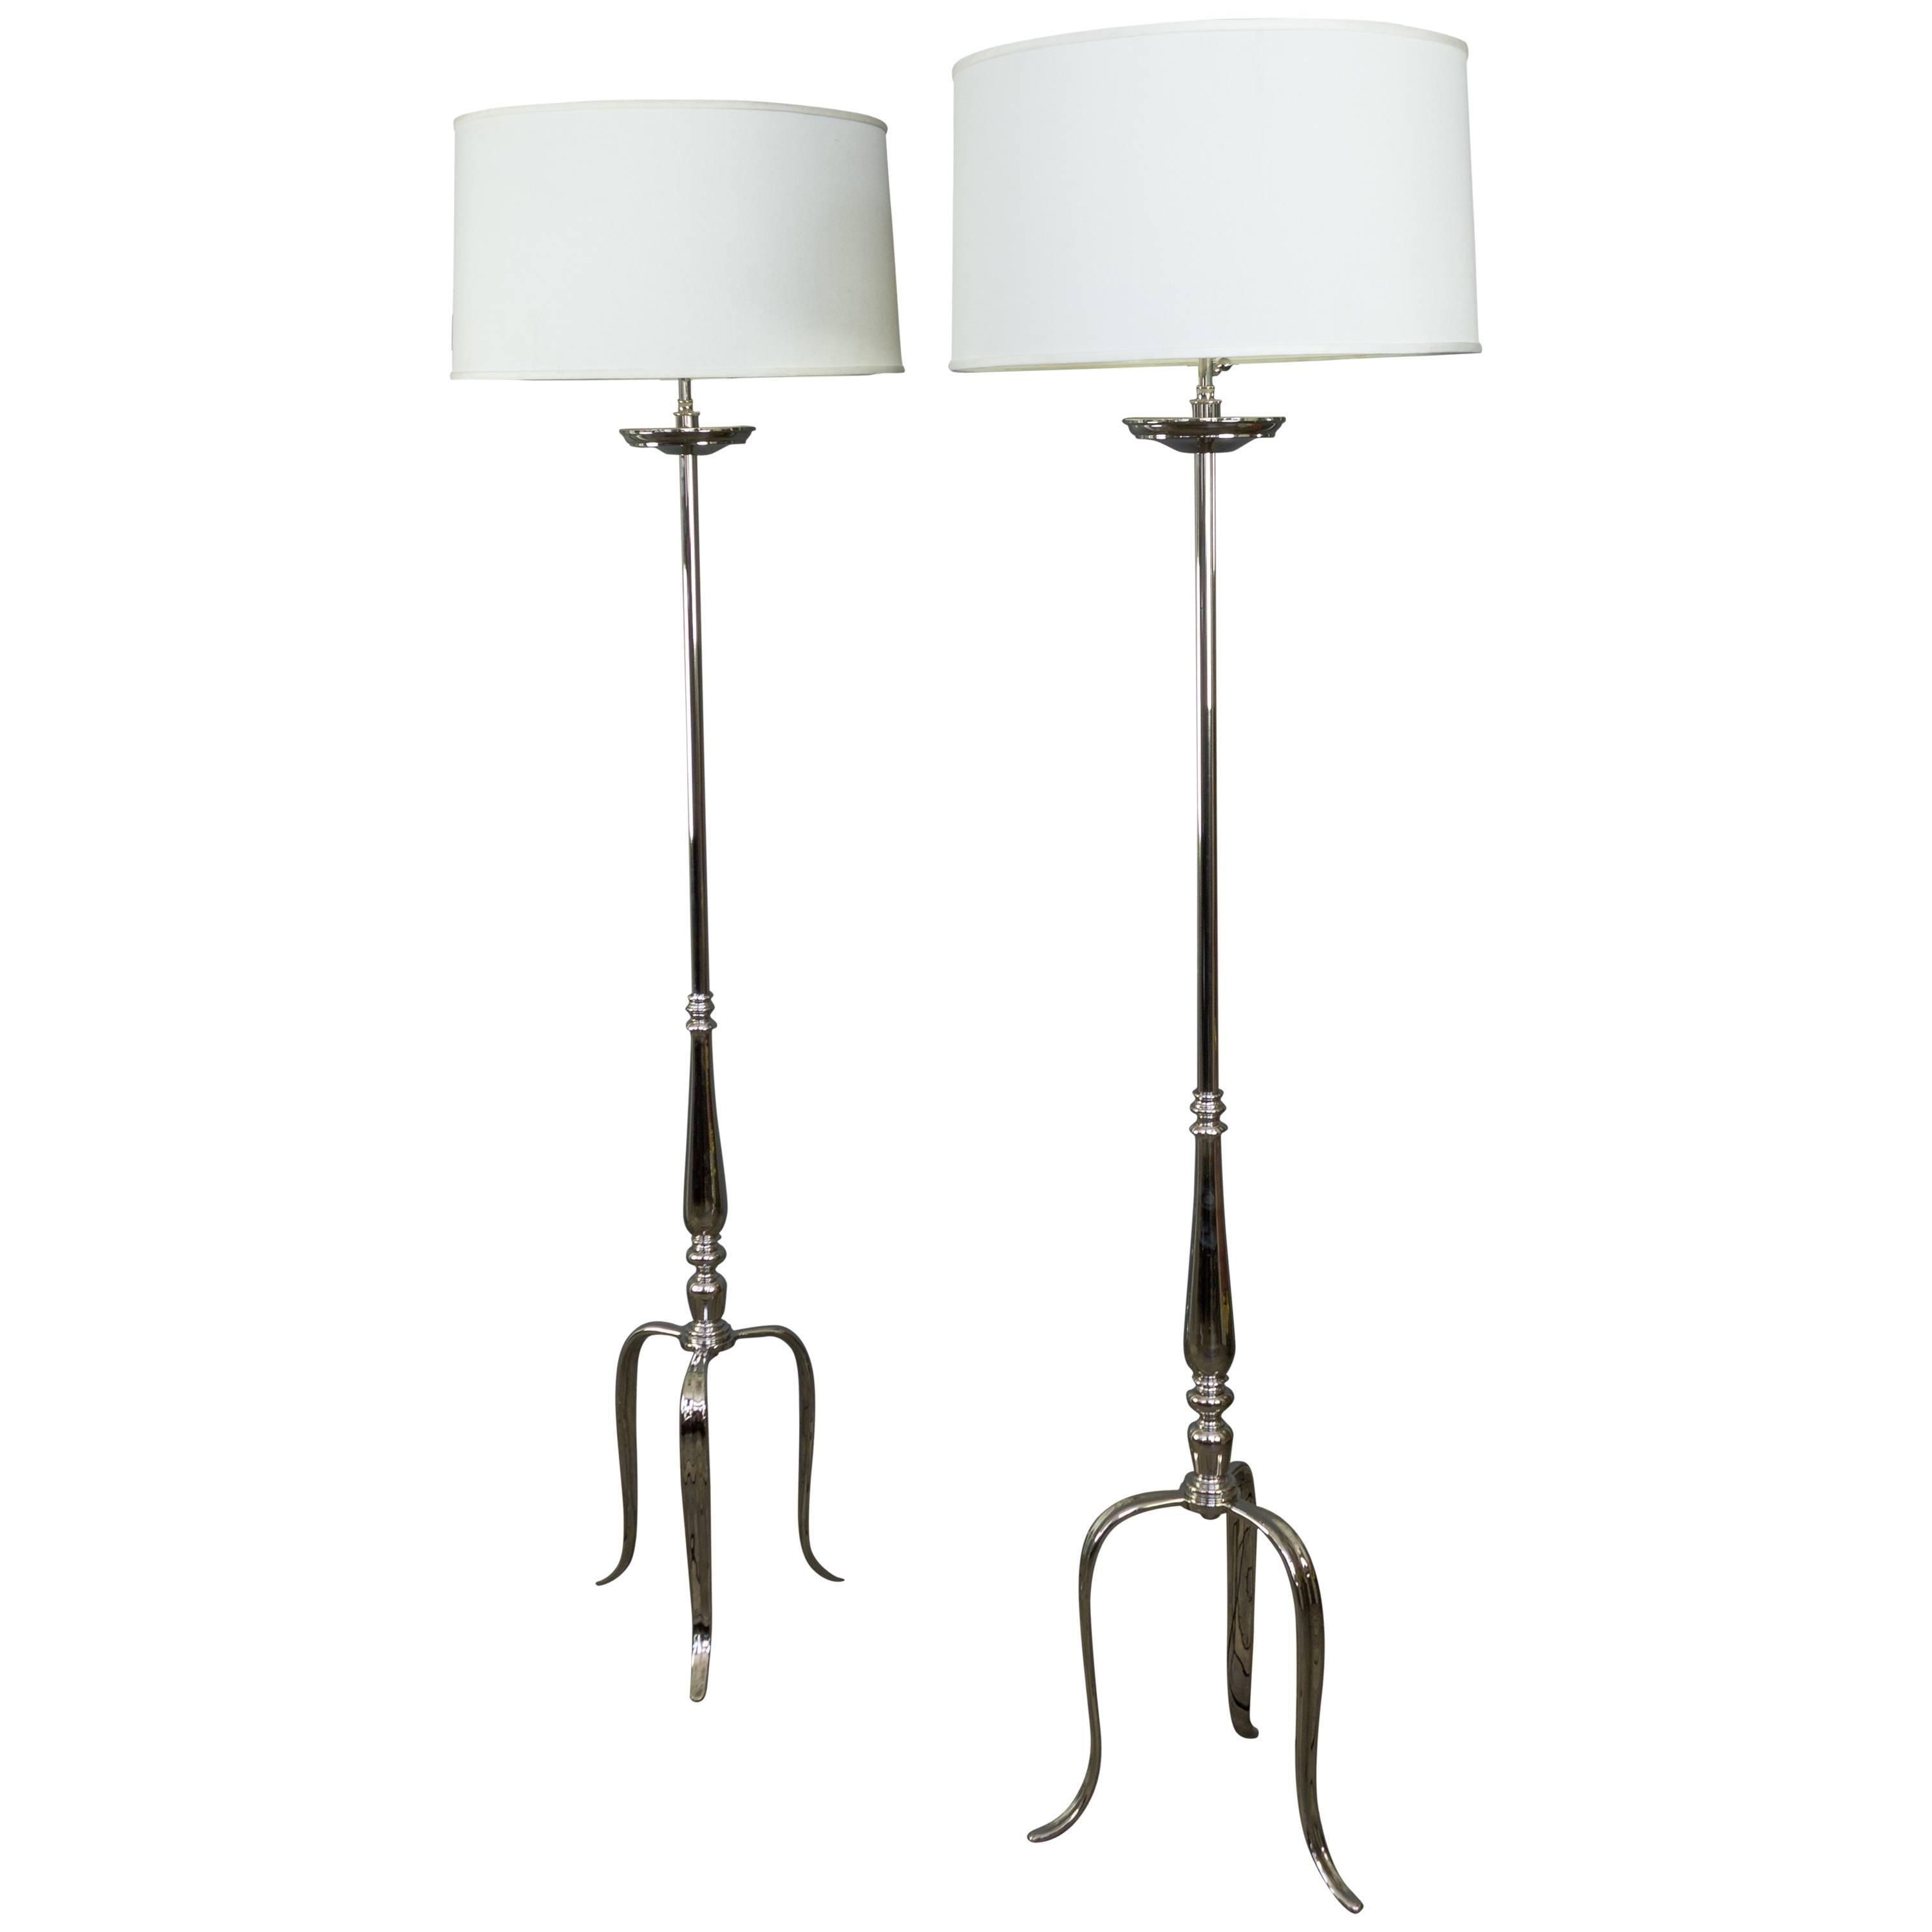 Pair of French 1950s Nickel-Plated Floor Lamps